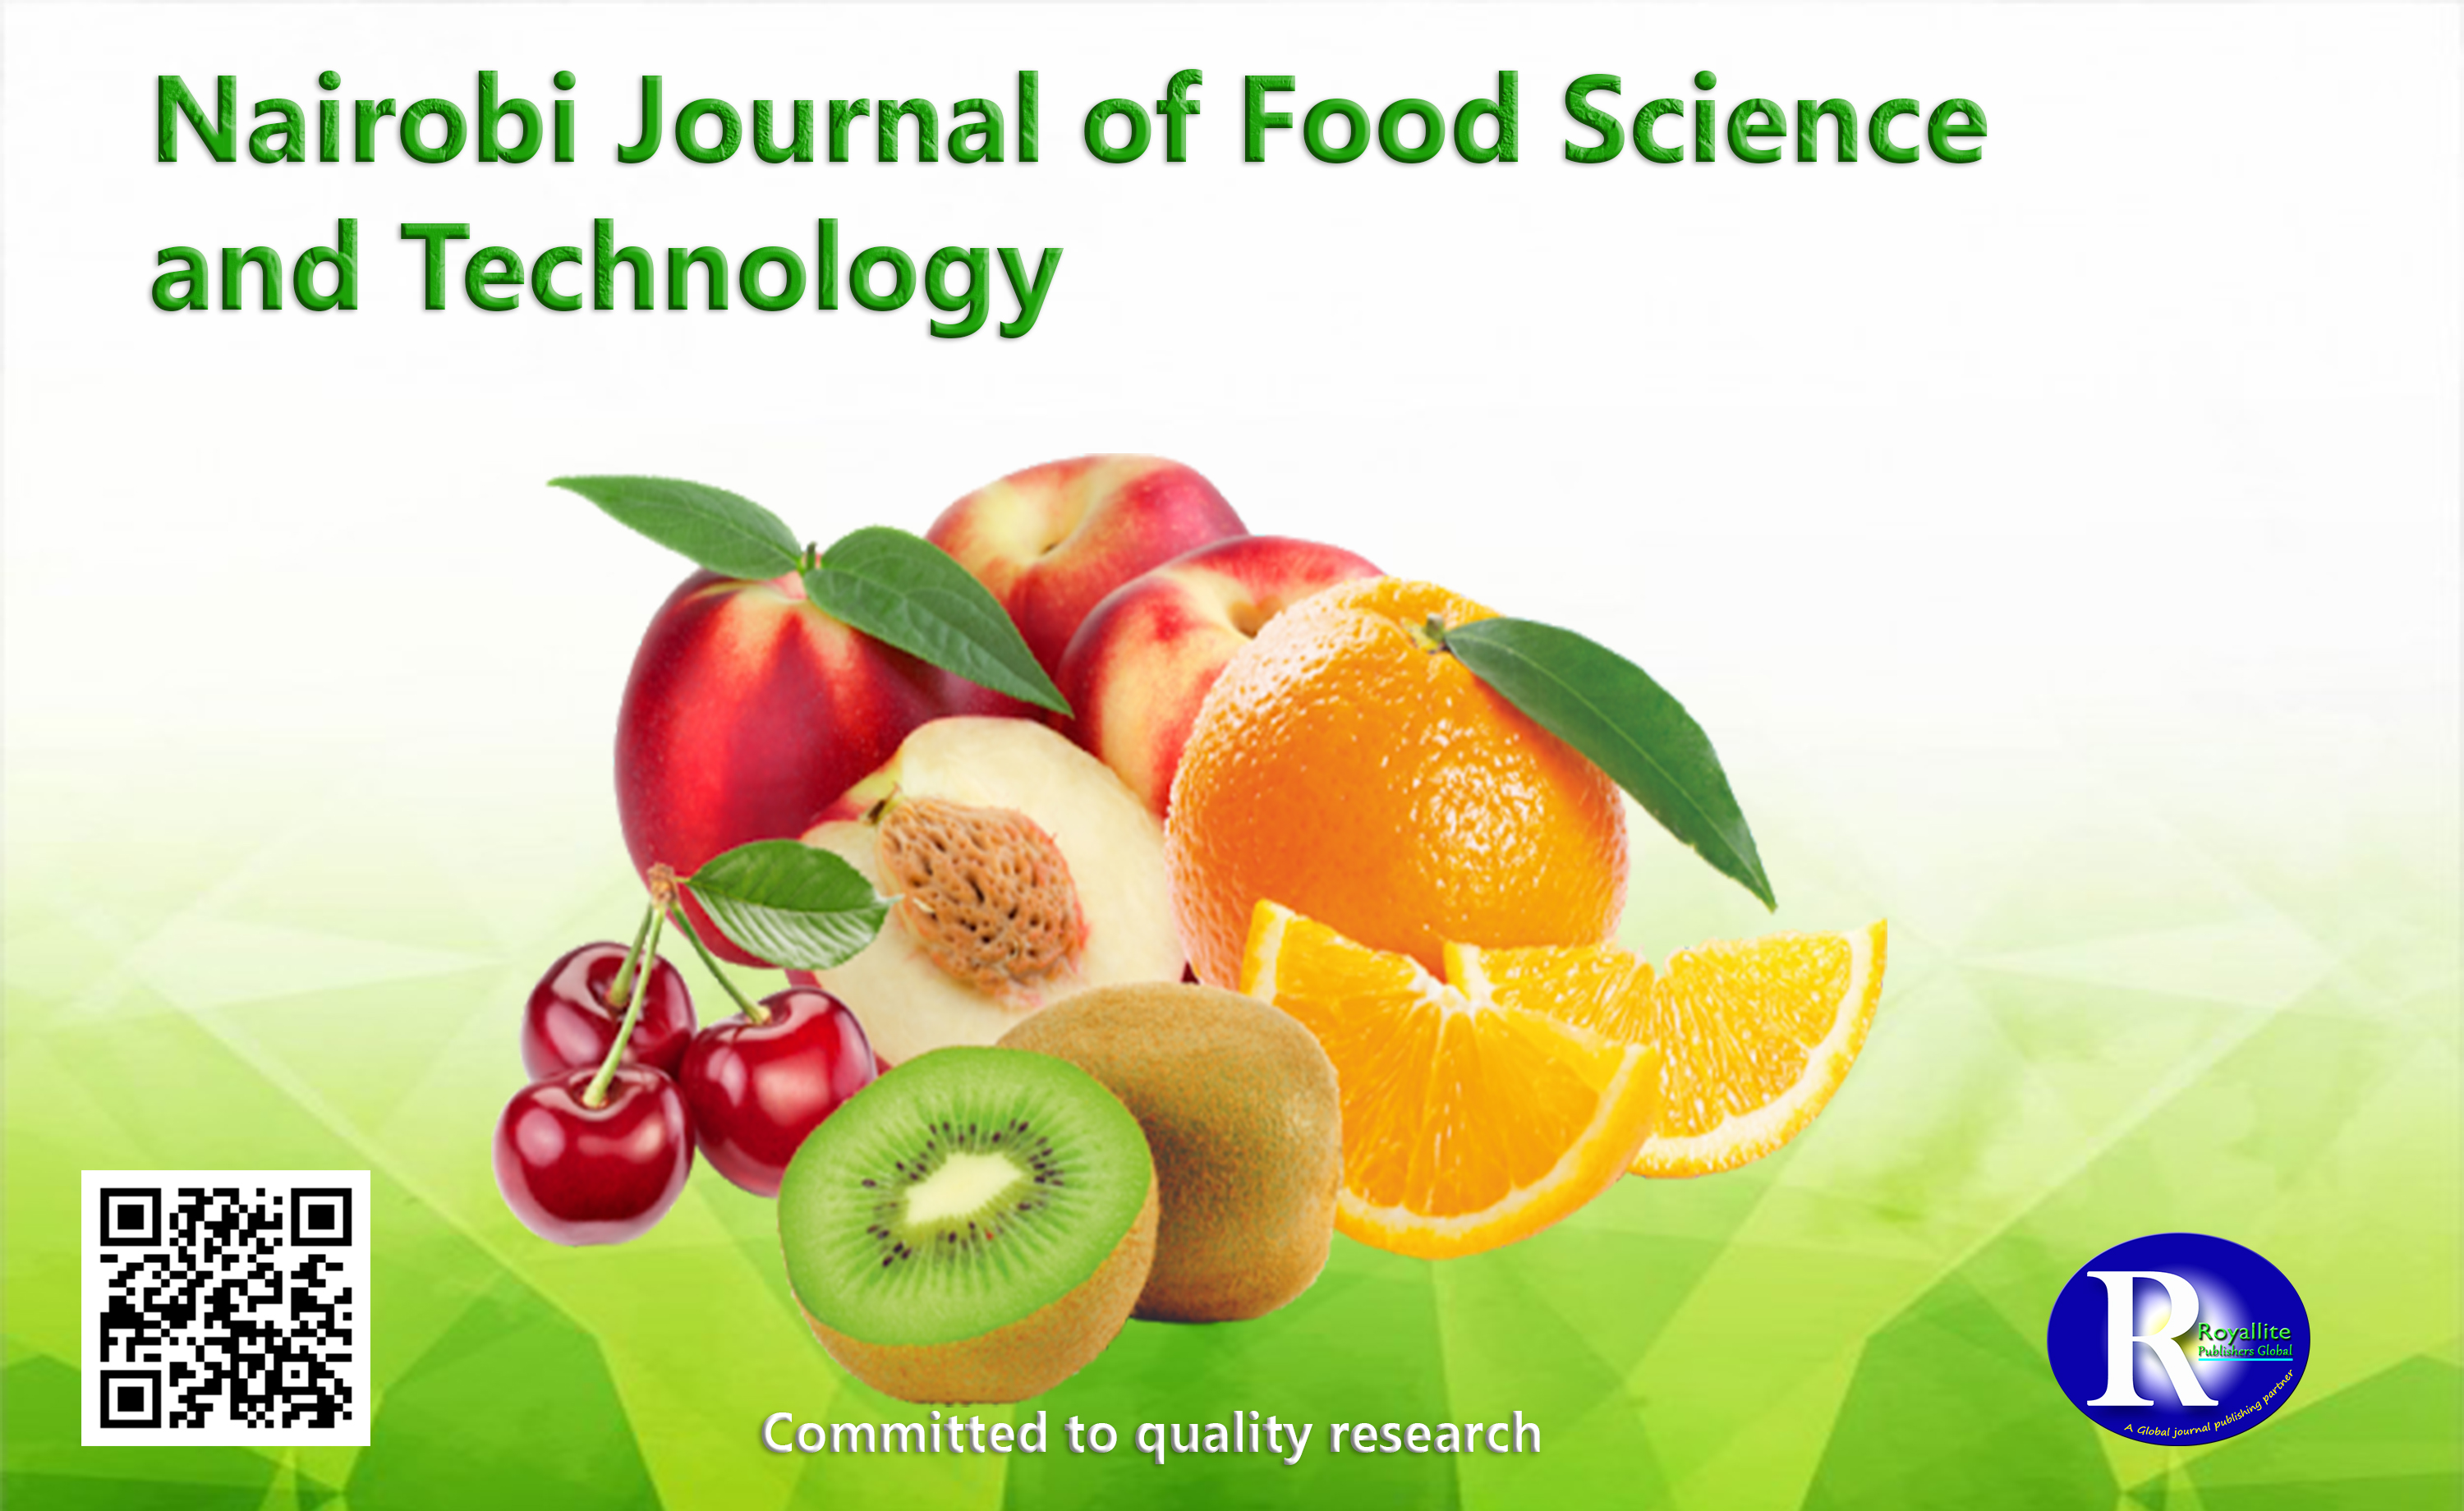 Nairobi Journal of Food Science and Technology